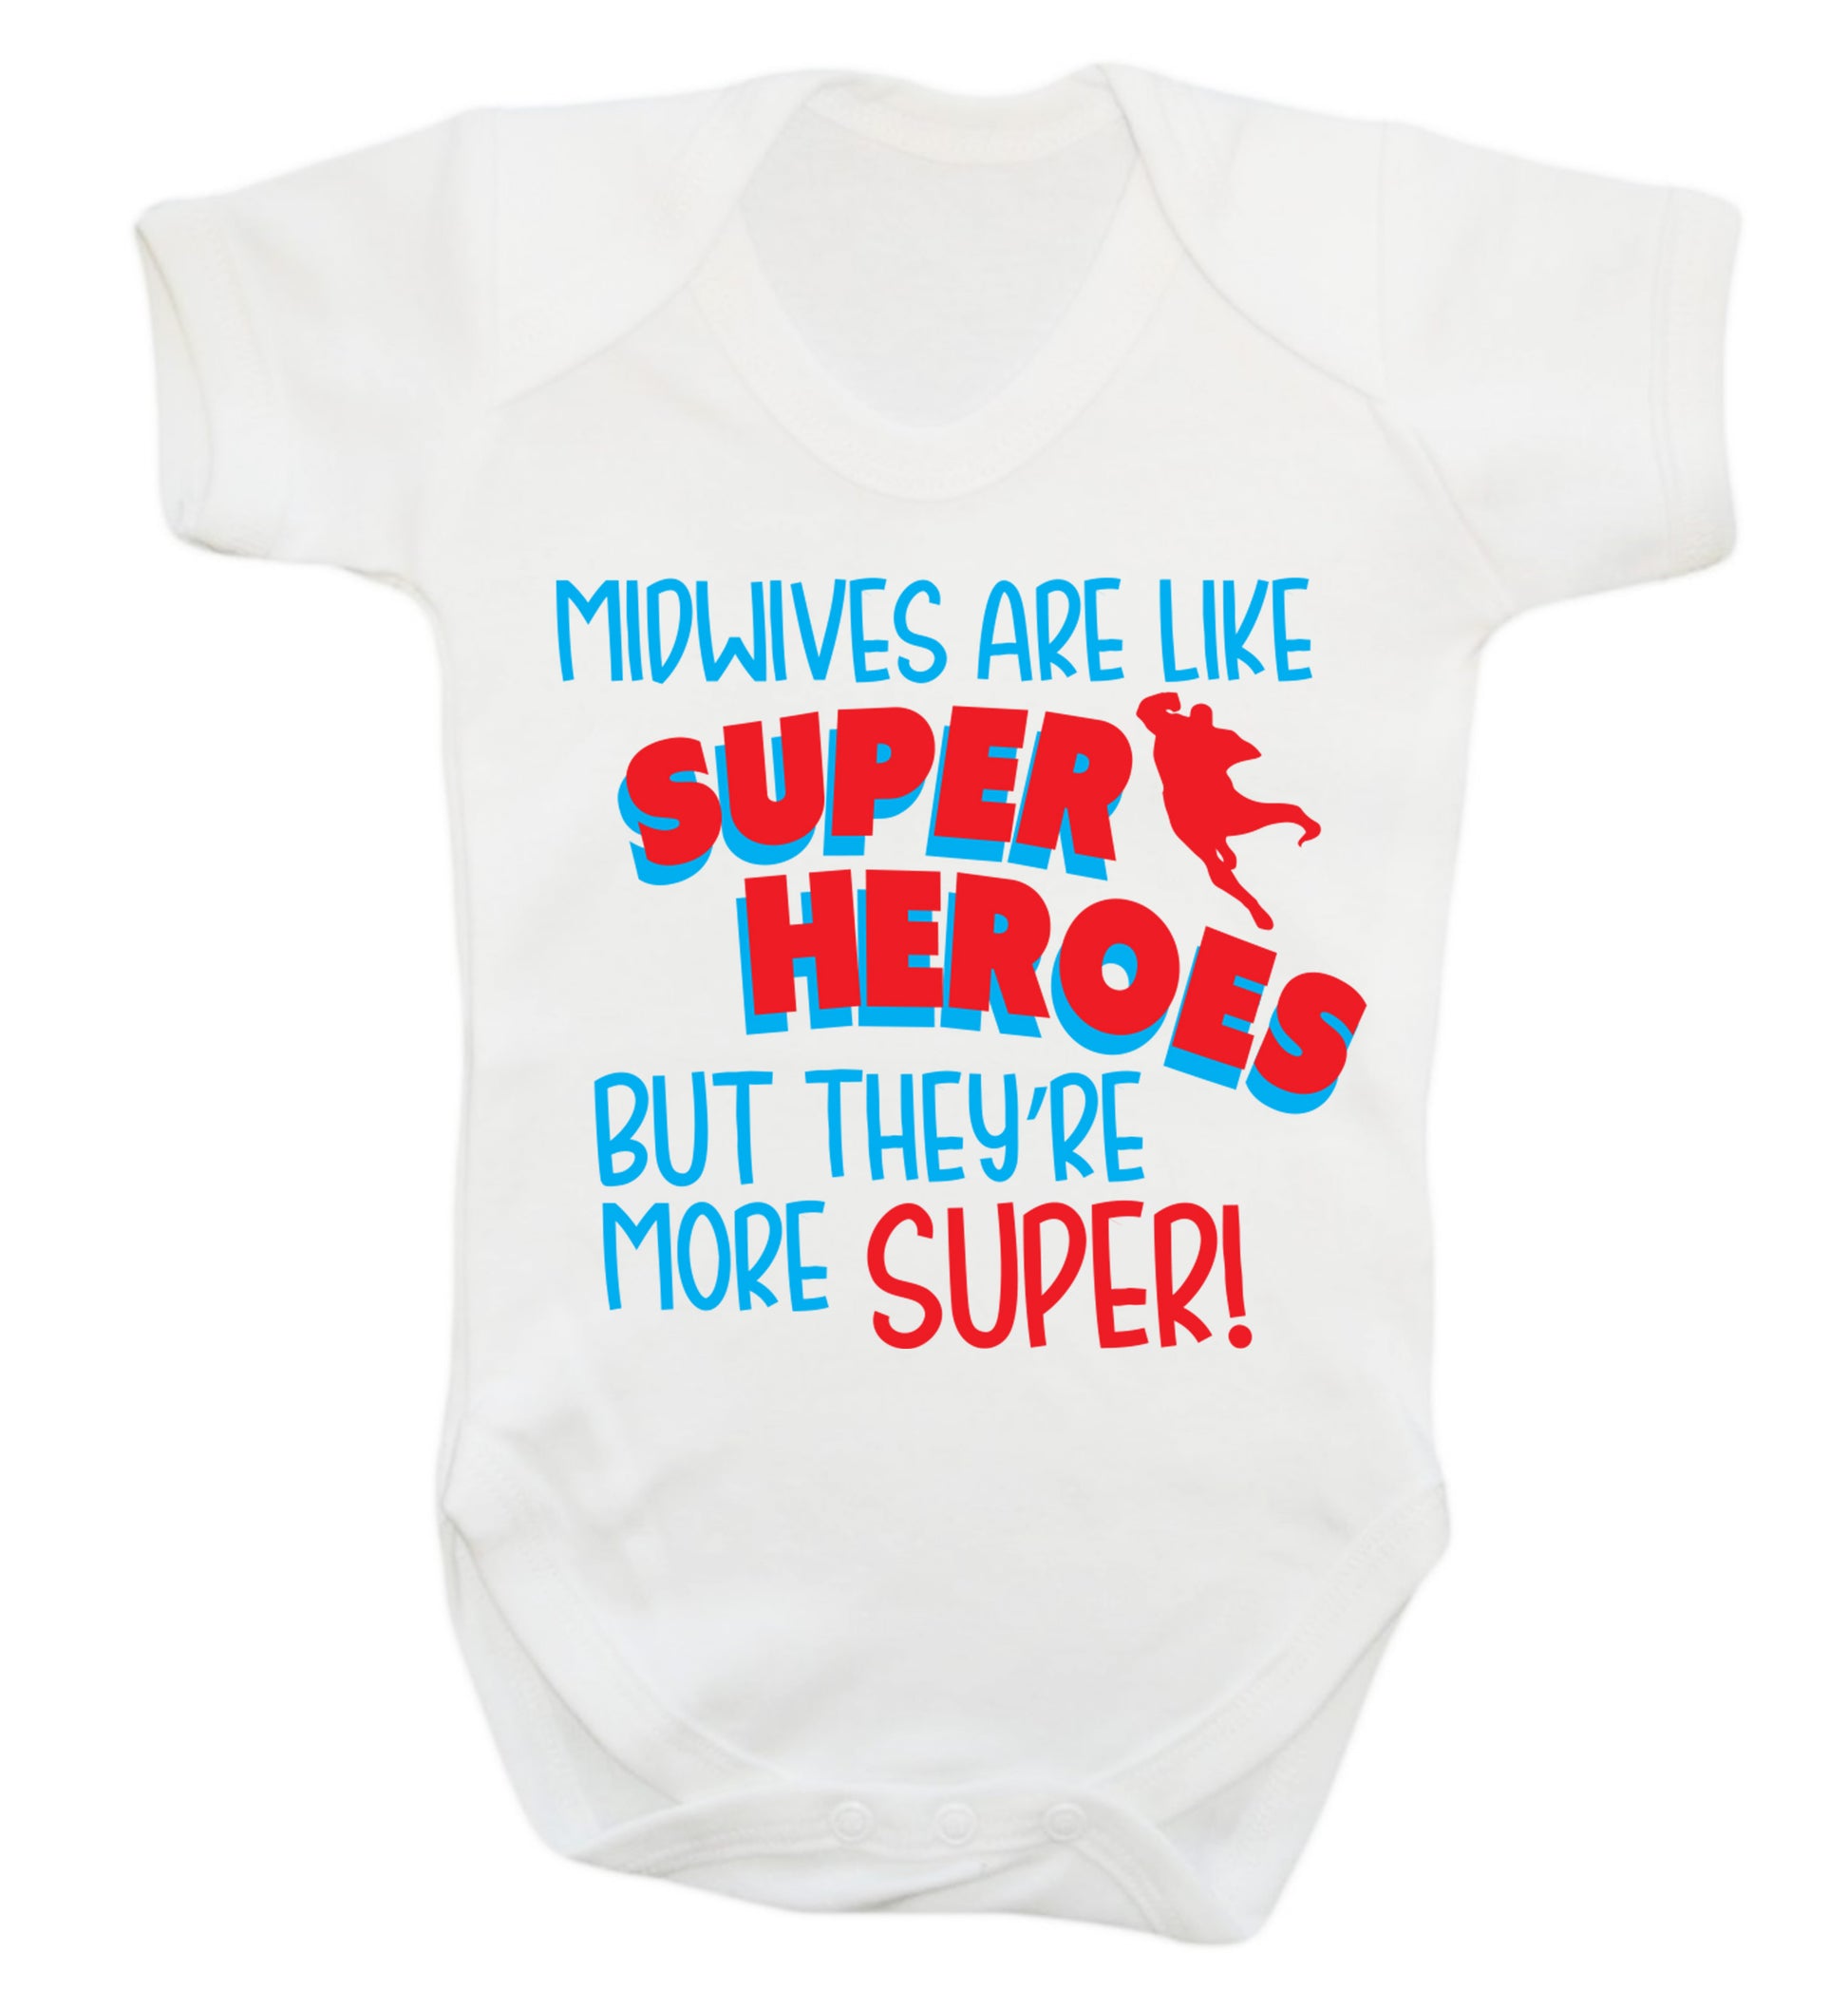 Midwives are like superheros but they're more super Baby Vest white 18-24 months